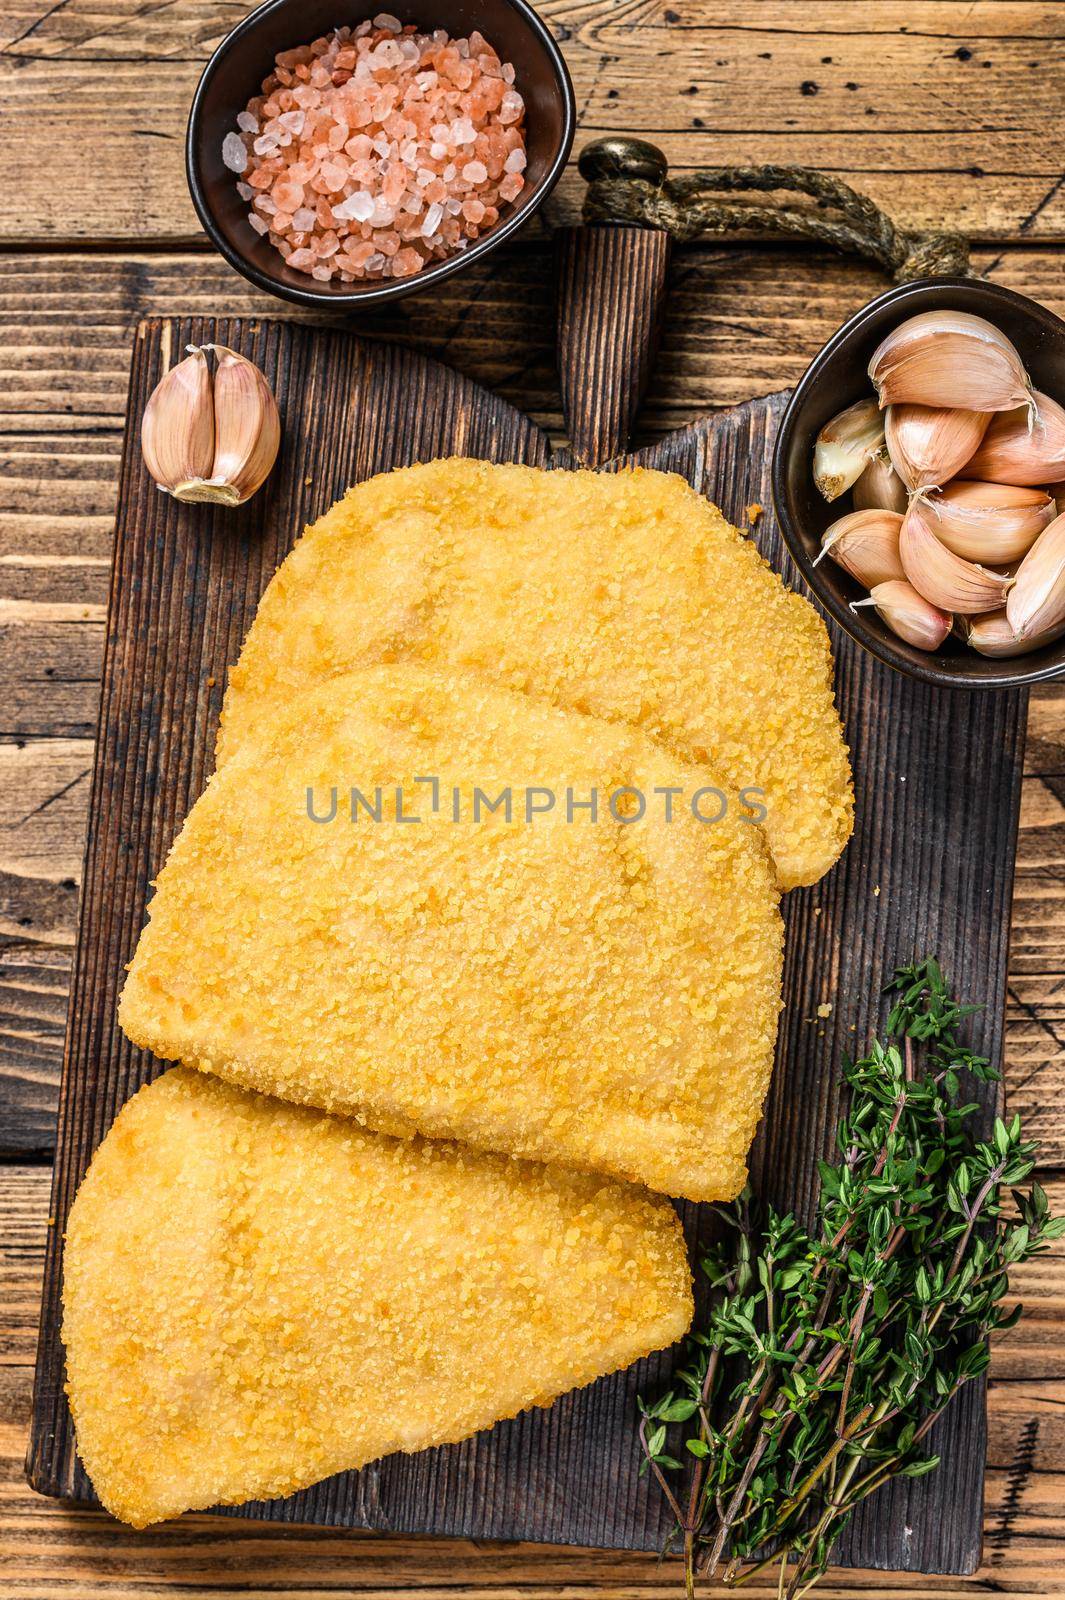 Cordon bleu meat cutlets with bread crumbs on a wooden board. wooden background. Top view by Composter